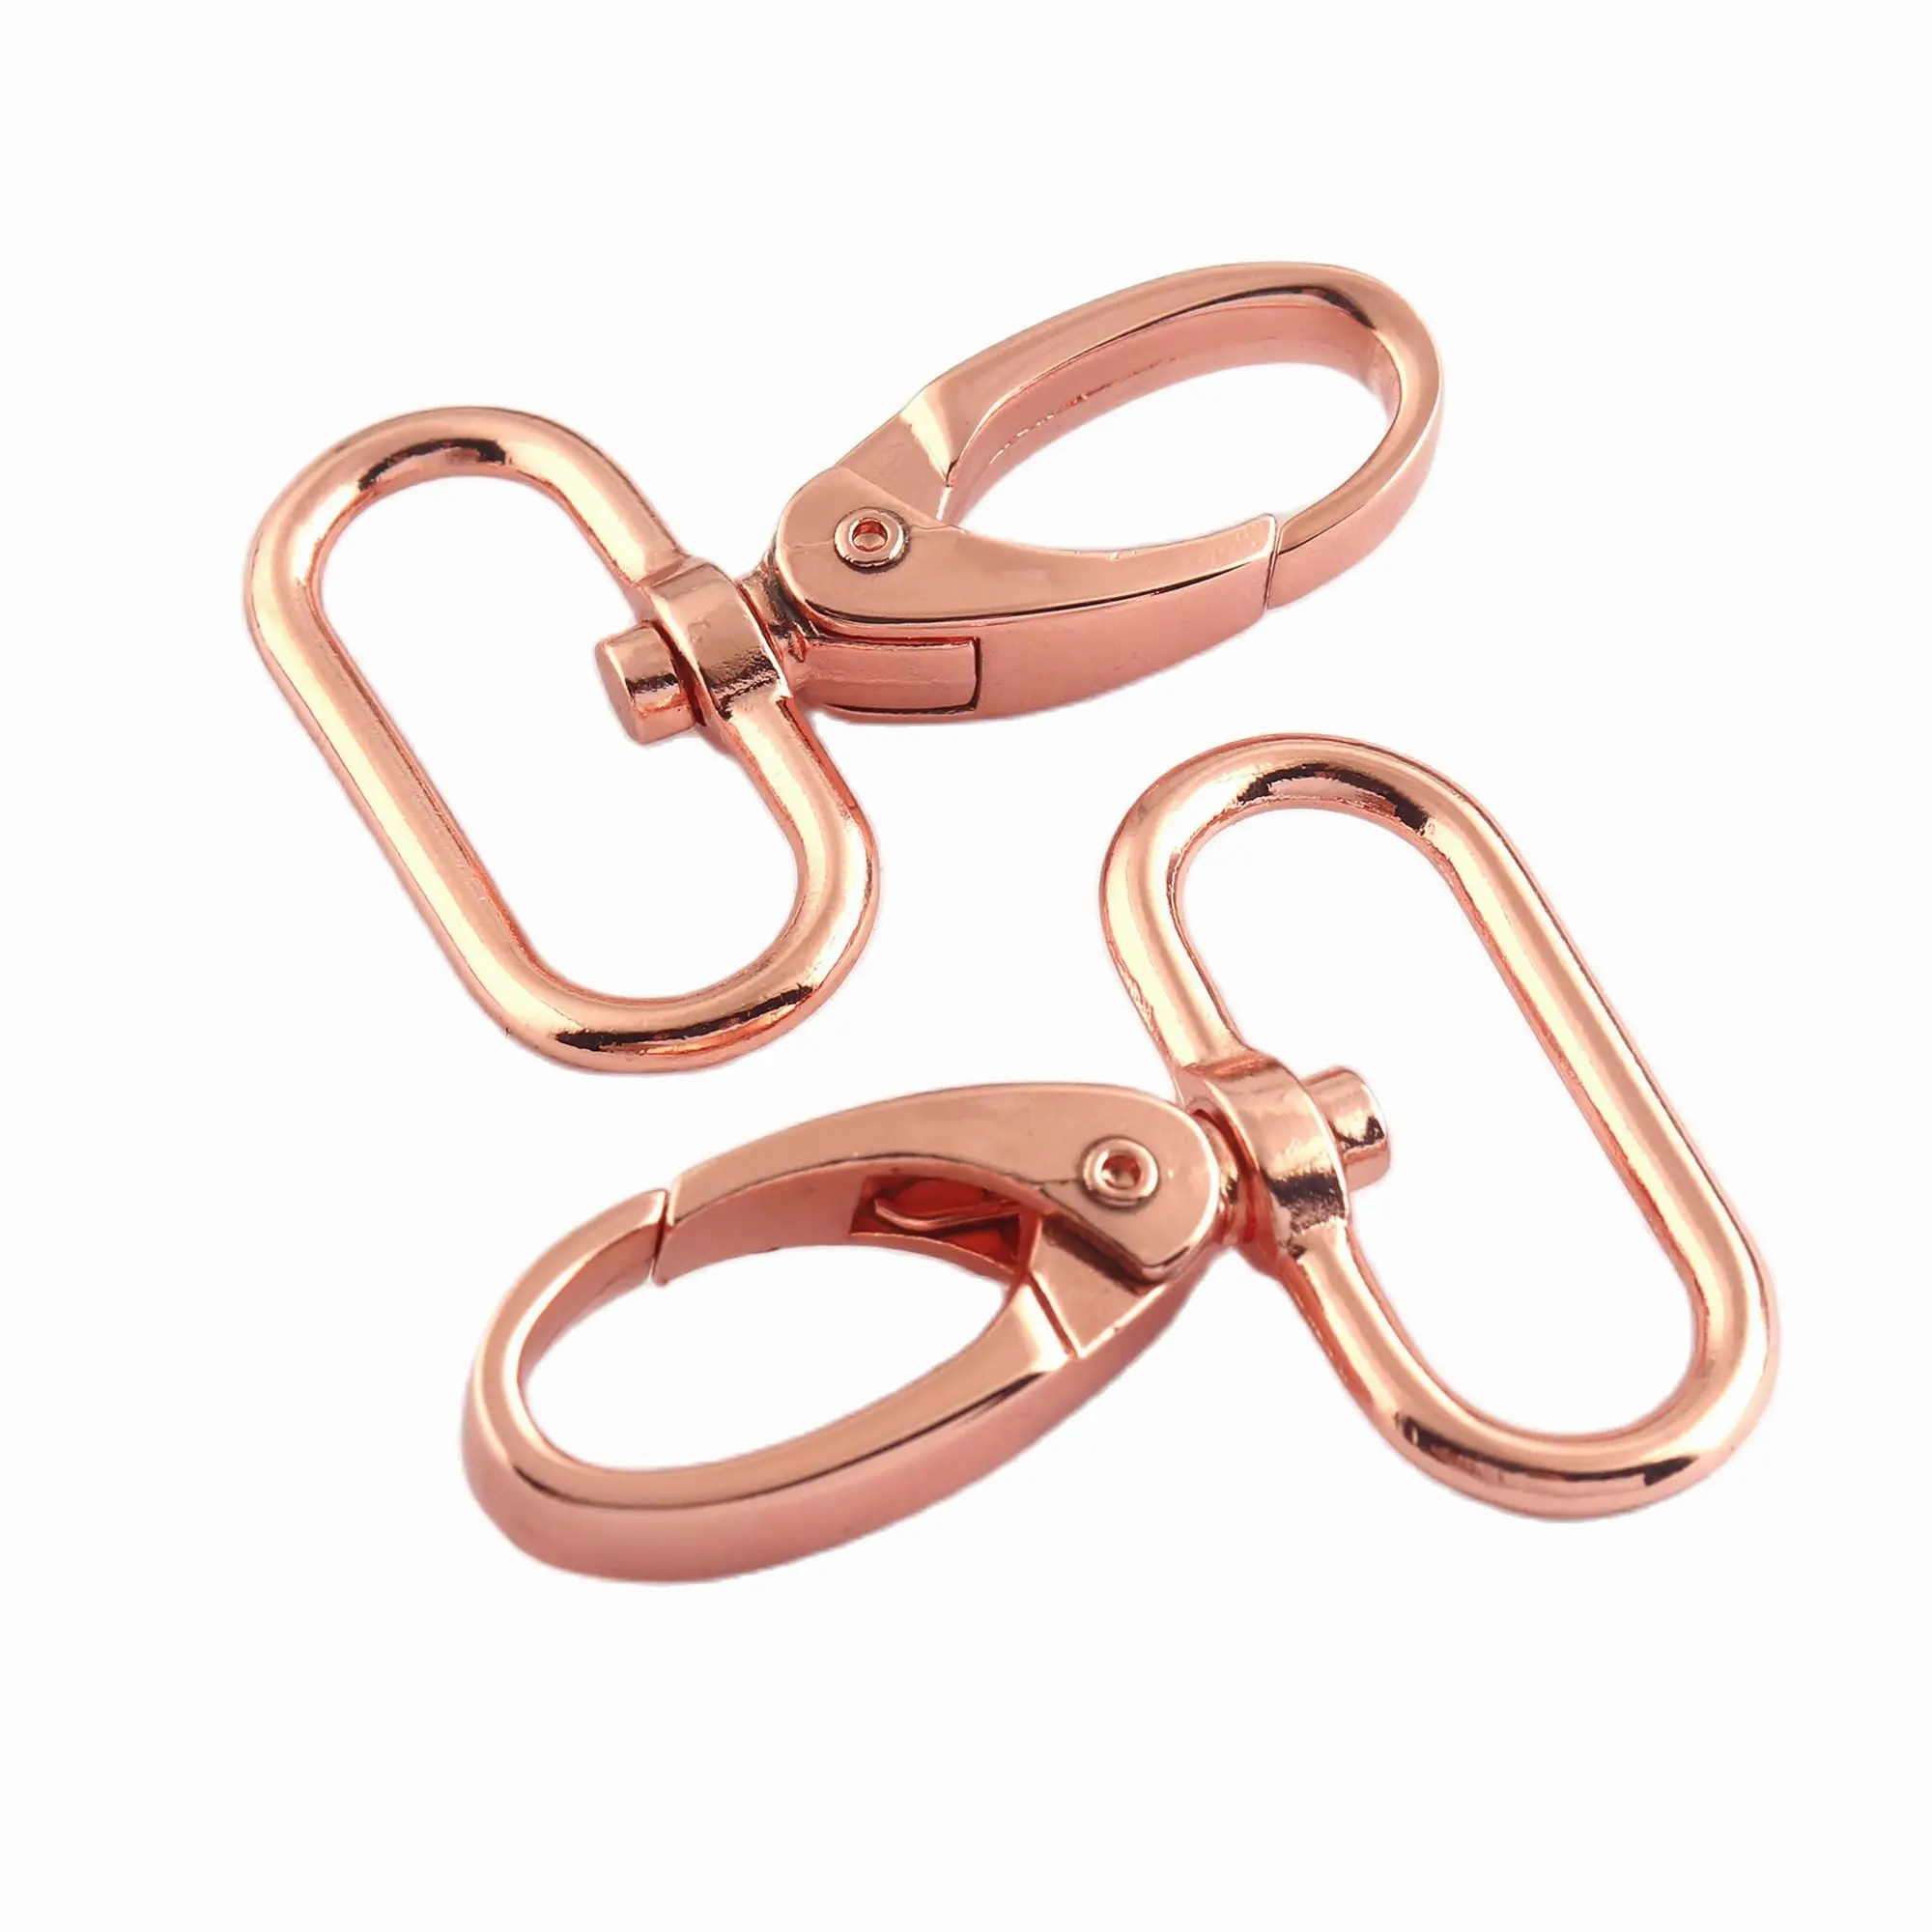 

Swivel clasps Rose gold Oval Ring Lobster Clasp Claw Push Gate Trigger Clasps Swivel Snap Hooks For keychain or backpack